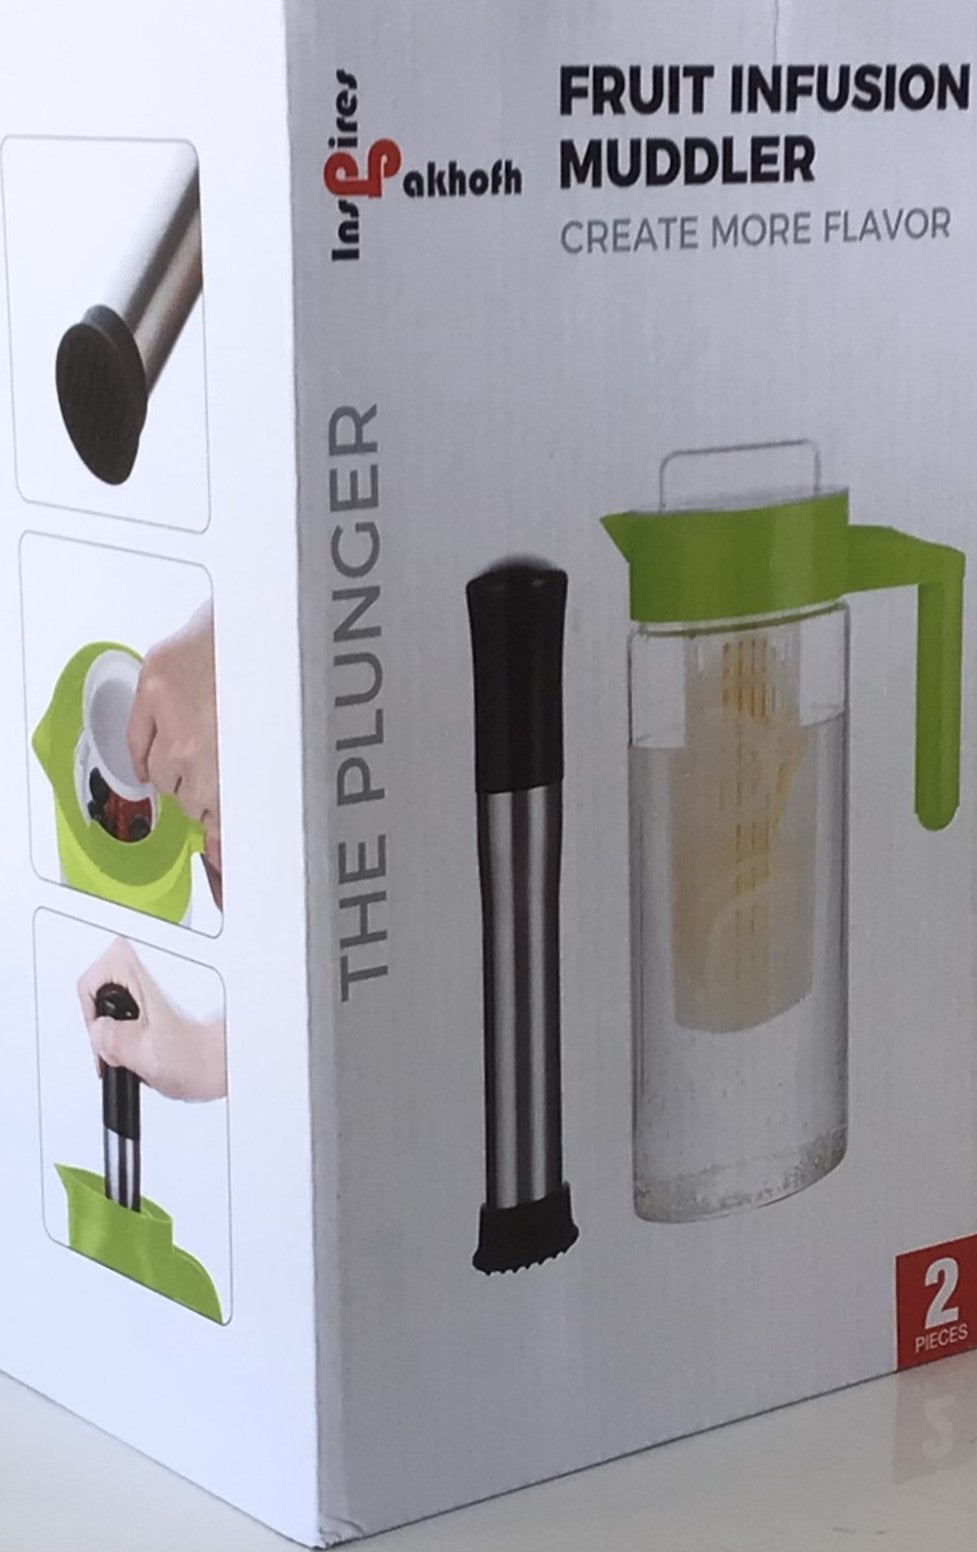 Pakhofh Fruit Infusion Muddler and Pitcher (Green & Black Plunger)